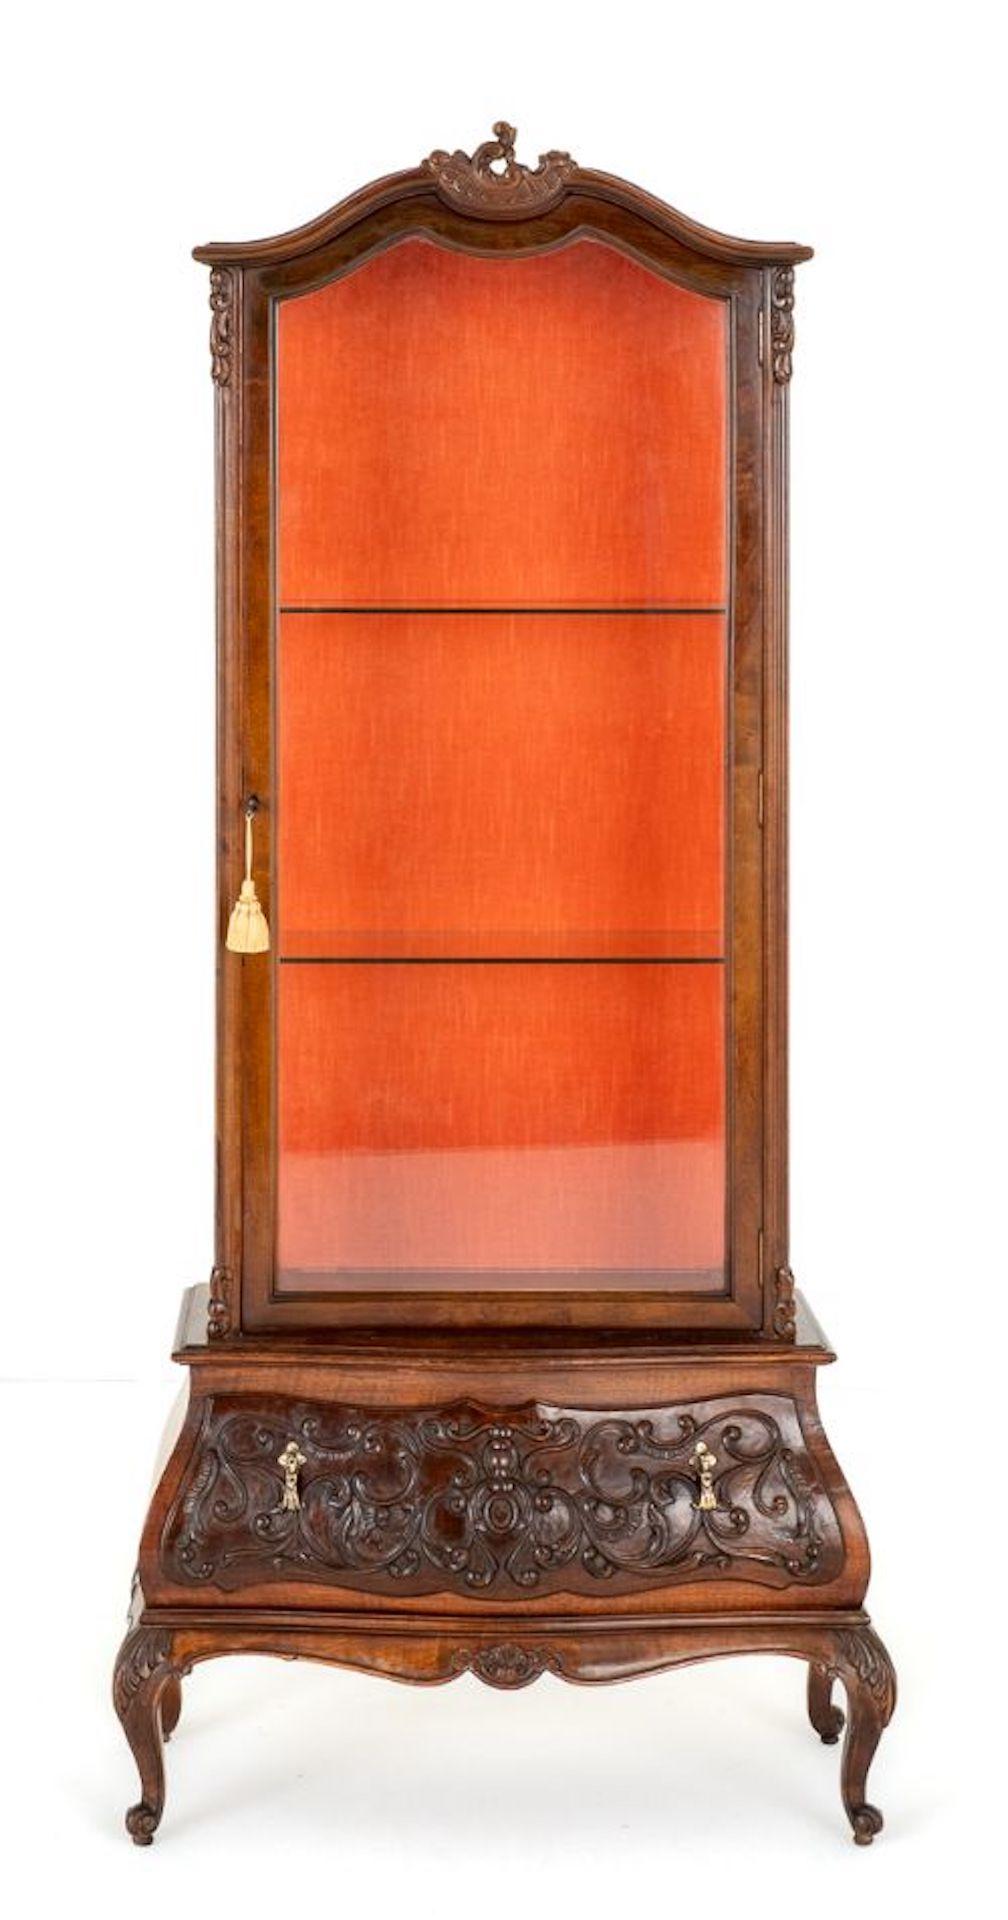 Here we Have a Rather Pretty French Style Mahogany Glazed Display Cabinet.
Standing Upon Carved Cabriole Legs with a Carved and Shaped Apron.
Circa 1920
The Base of the Cabinet Being of a Bombe Form with 1 Deep Mahogany Carved Drawer.
The Upper